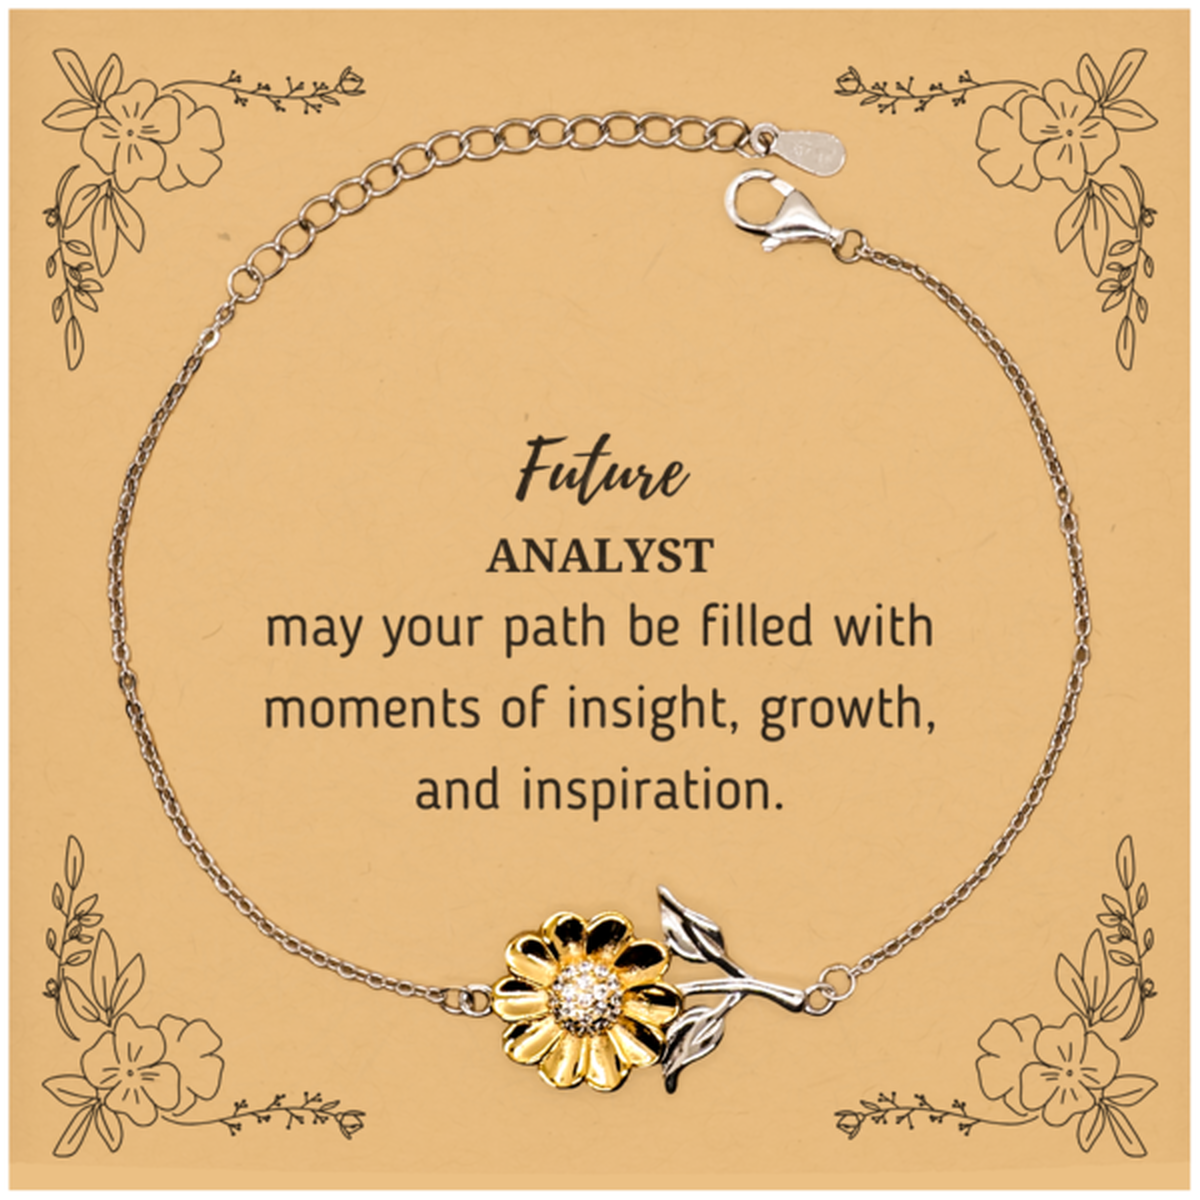 Future Analyst Gifts, May your path be filled with moments of insight, Graduation Gifts for New Analyst, Christmas Unique Sunflower Bracelet For Men, Women, Friends